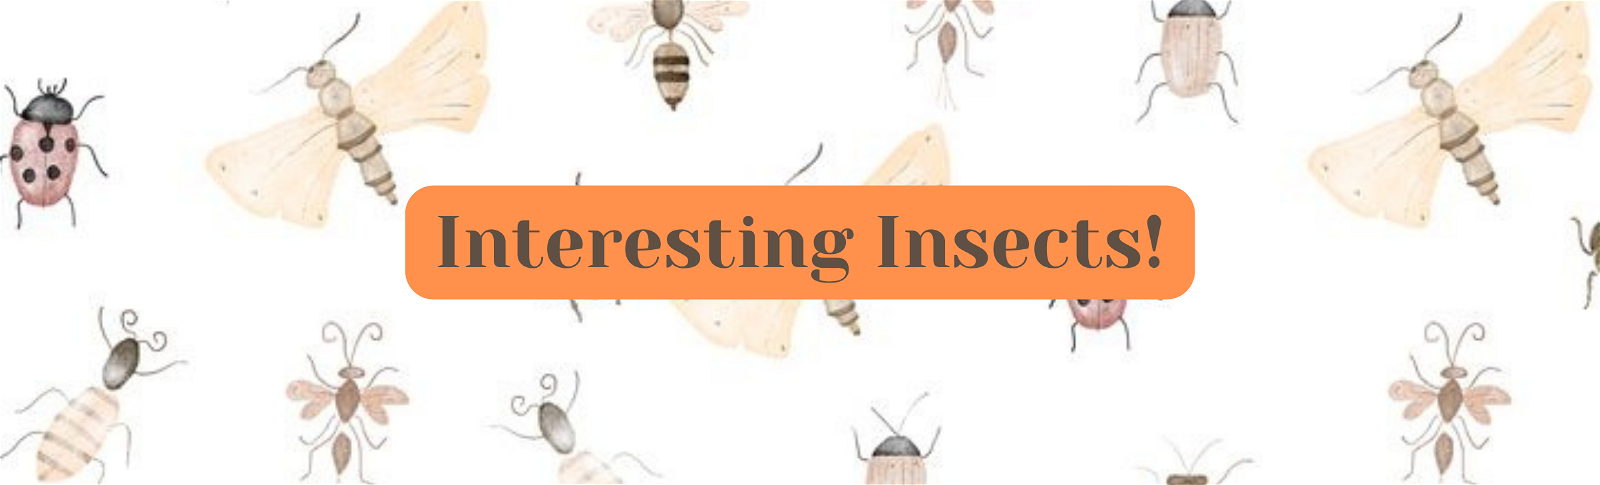 Interesting Insects | Vol #1